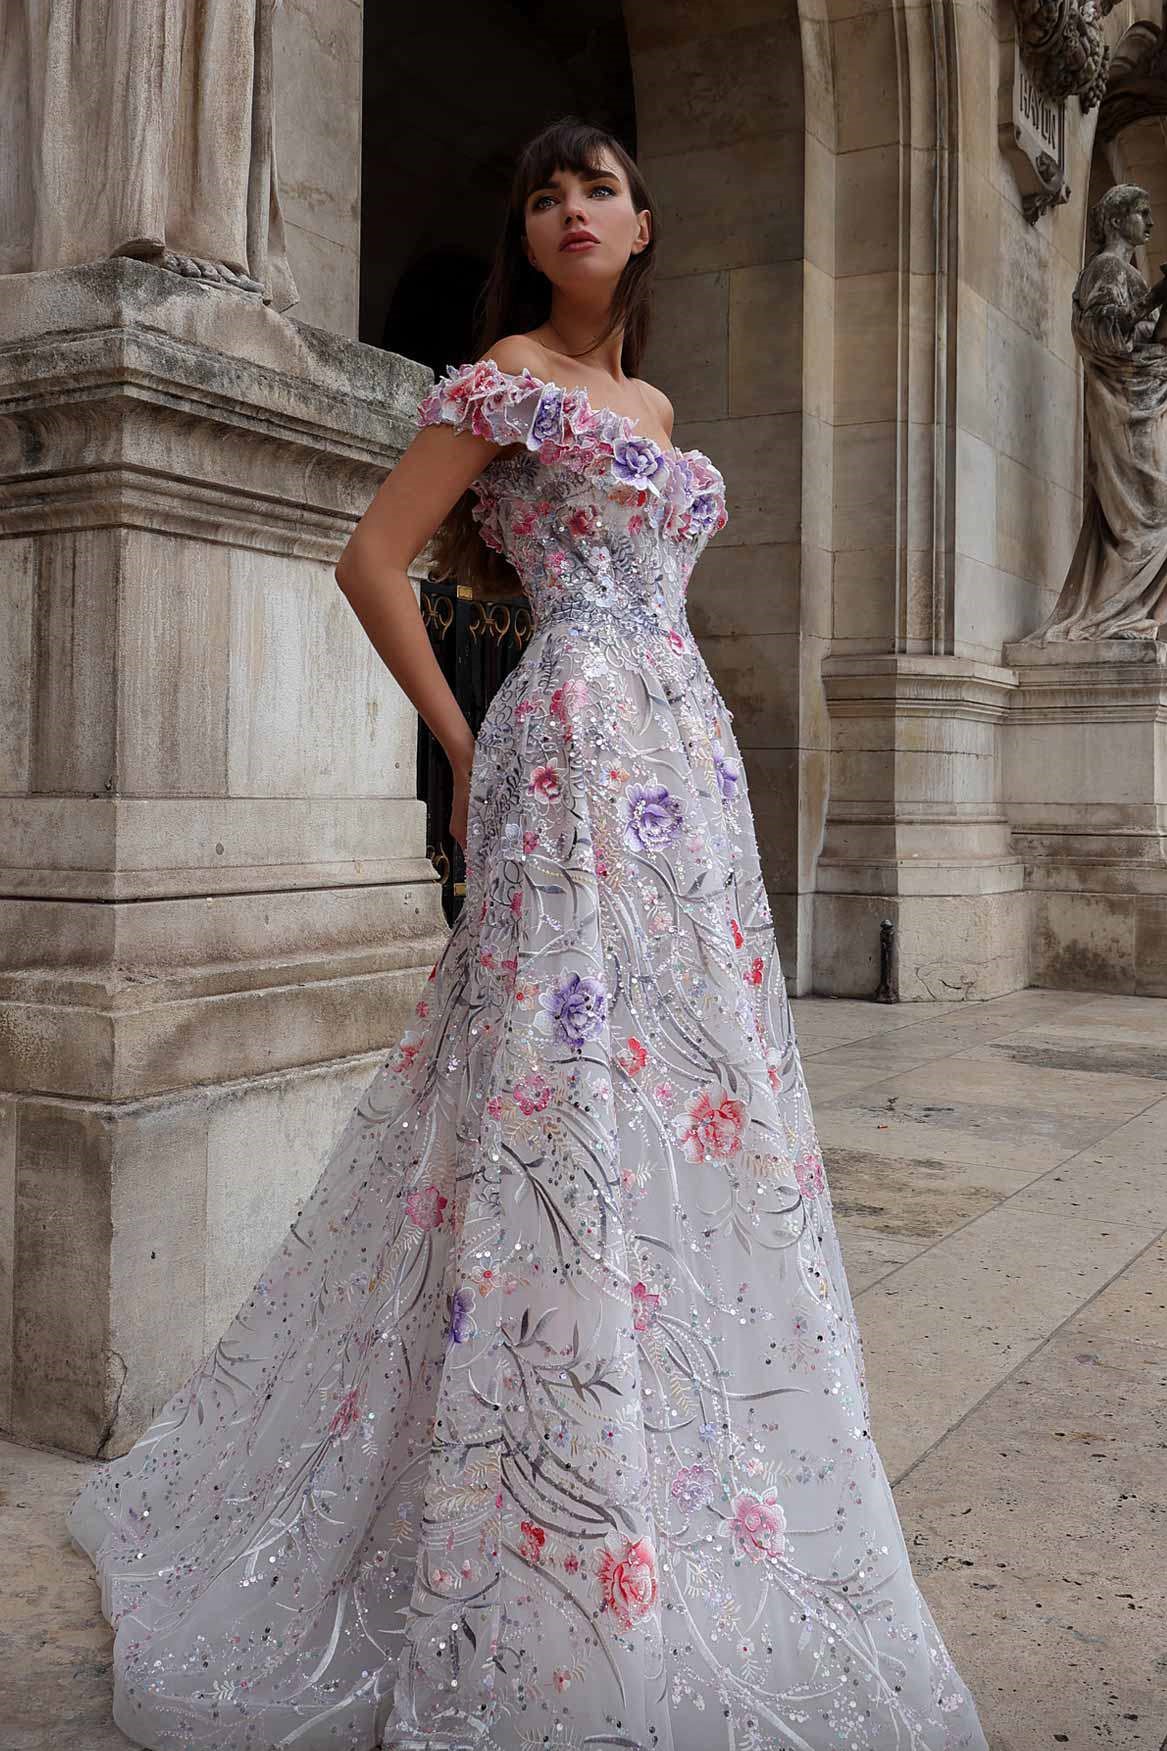 Sophie Couture - Hand embroidered gown with flower motives